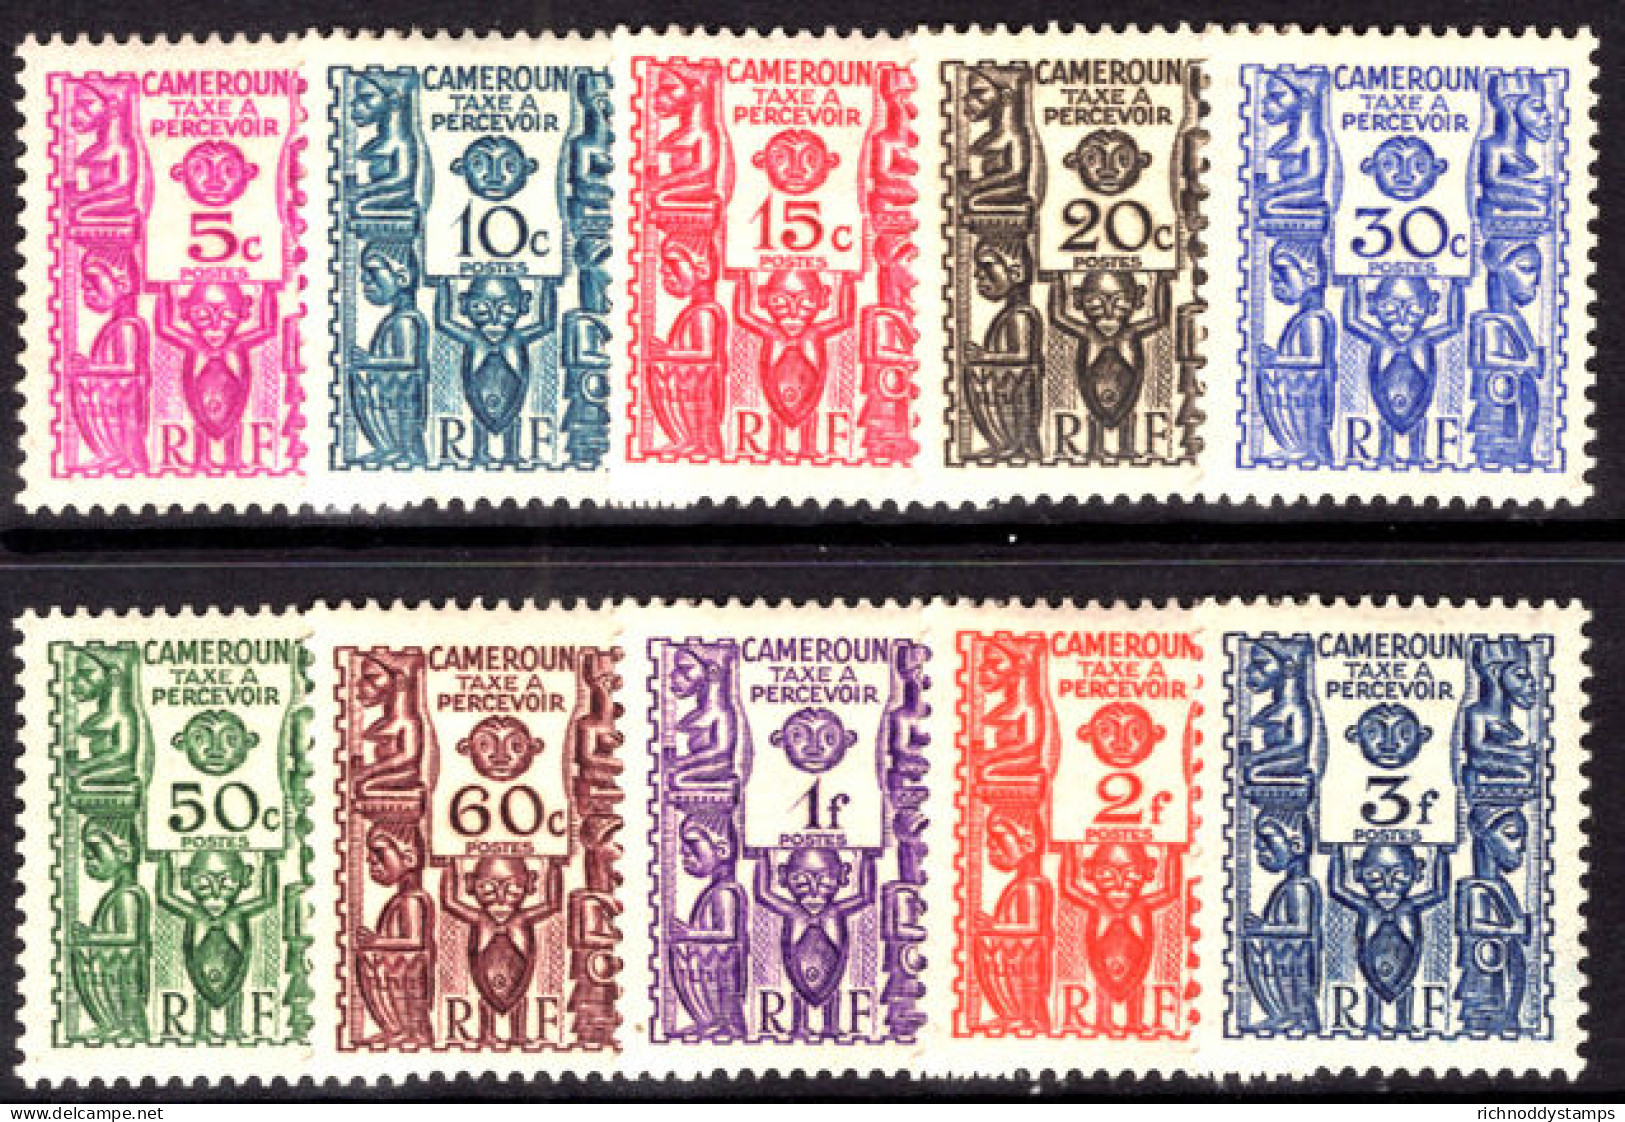 Cameroon 1939 Postage Due Set Lightly Mounted Mint. - Unused Stamps